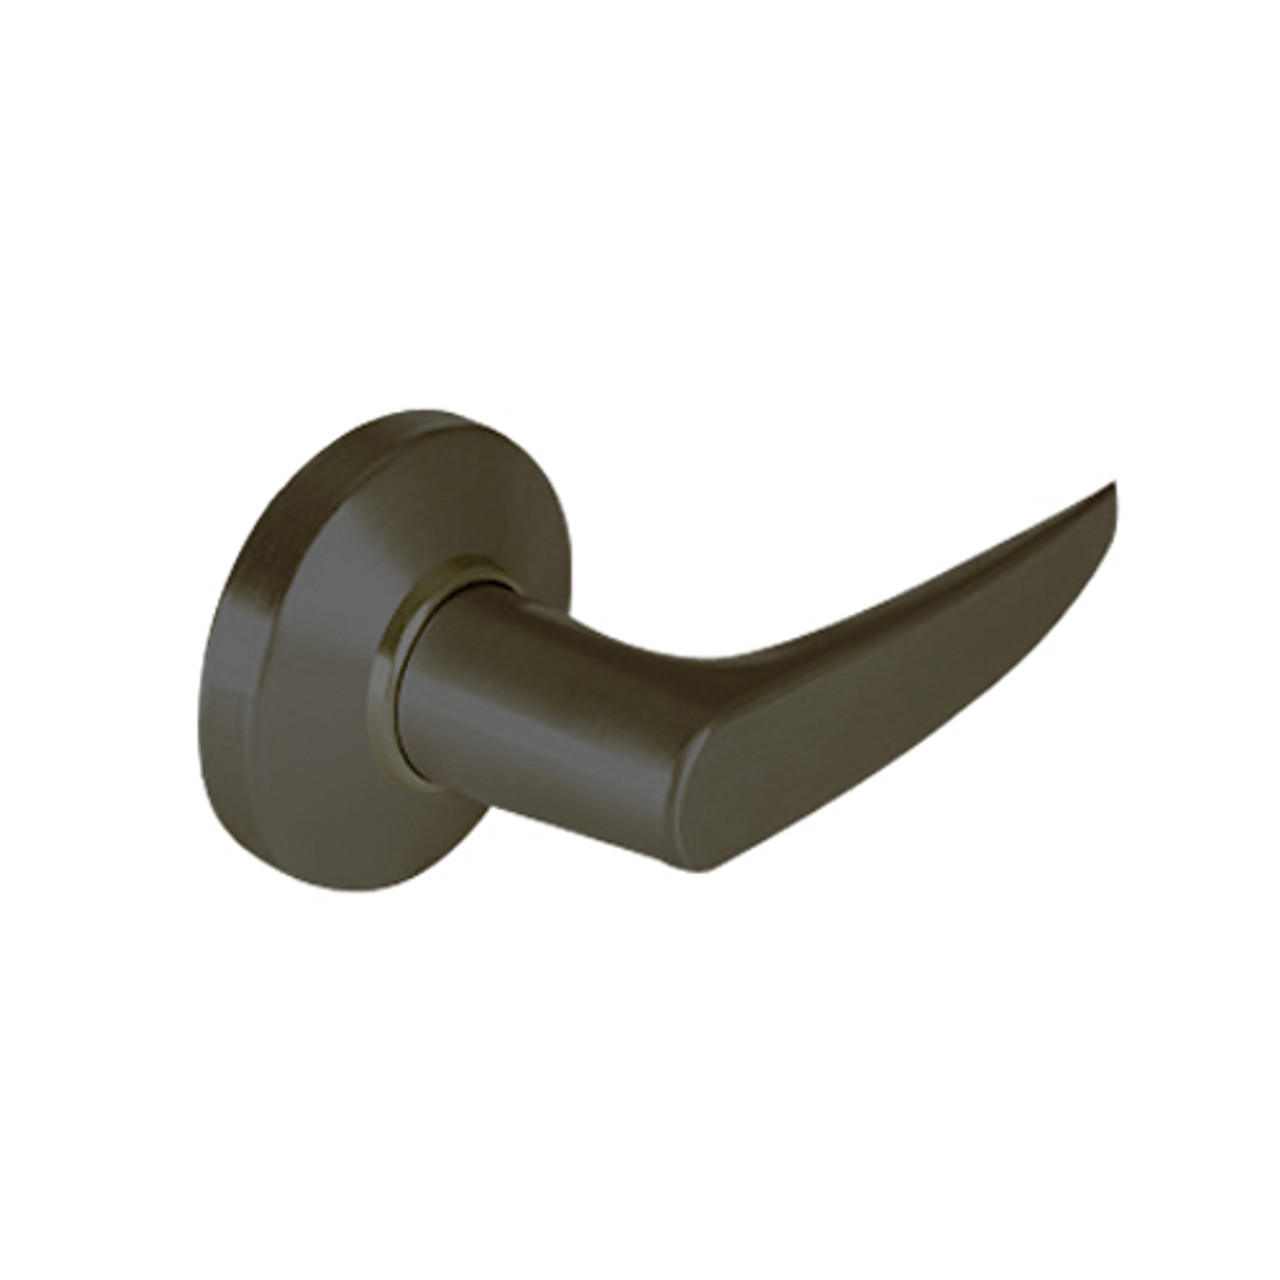 9K30Y16CSTK613 Best 9K Series Exit Heavy Duty Cylindrical Lever Locks with Curved Without Return Lever Design in Oil Rubbed Bronze